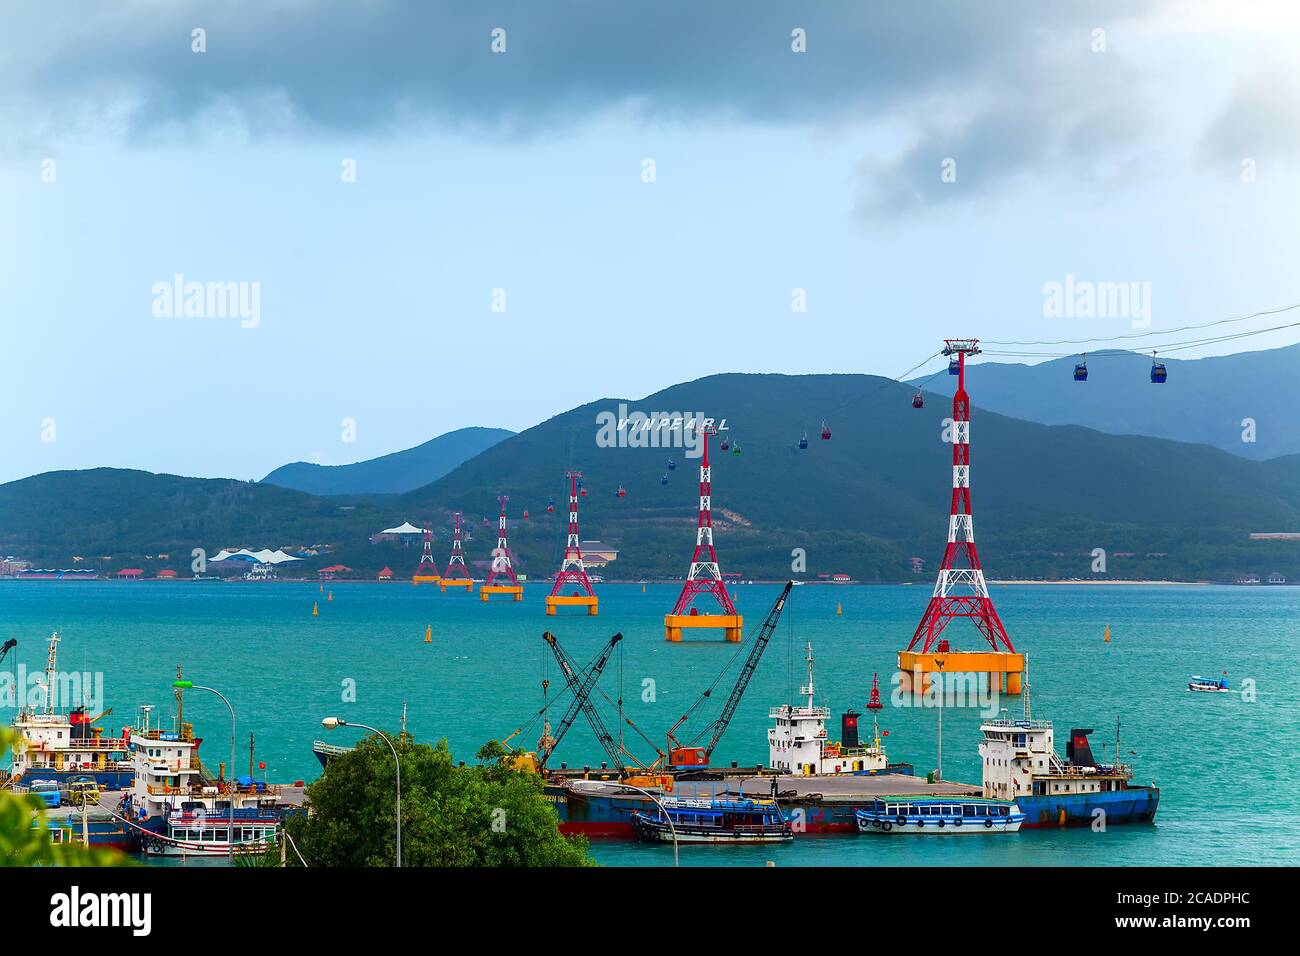 NHA TRANG, VIETNAM - FEB 12, 2015: Cable car tower to Vin pearl Amusement Park Island Scenic Colorful Sky At Sunset Dawn Sunrise, cableway long rope r Stock Photo